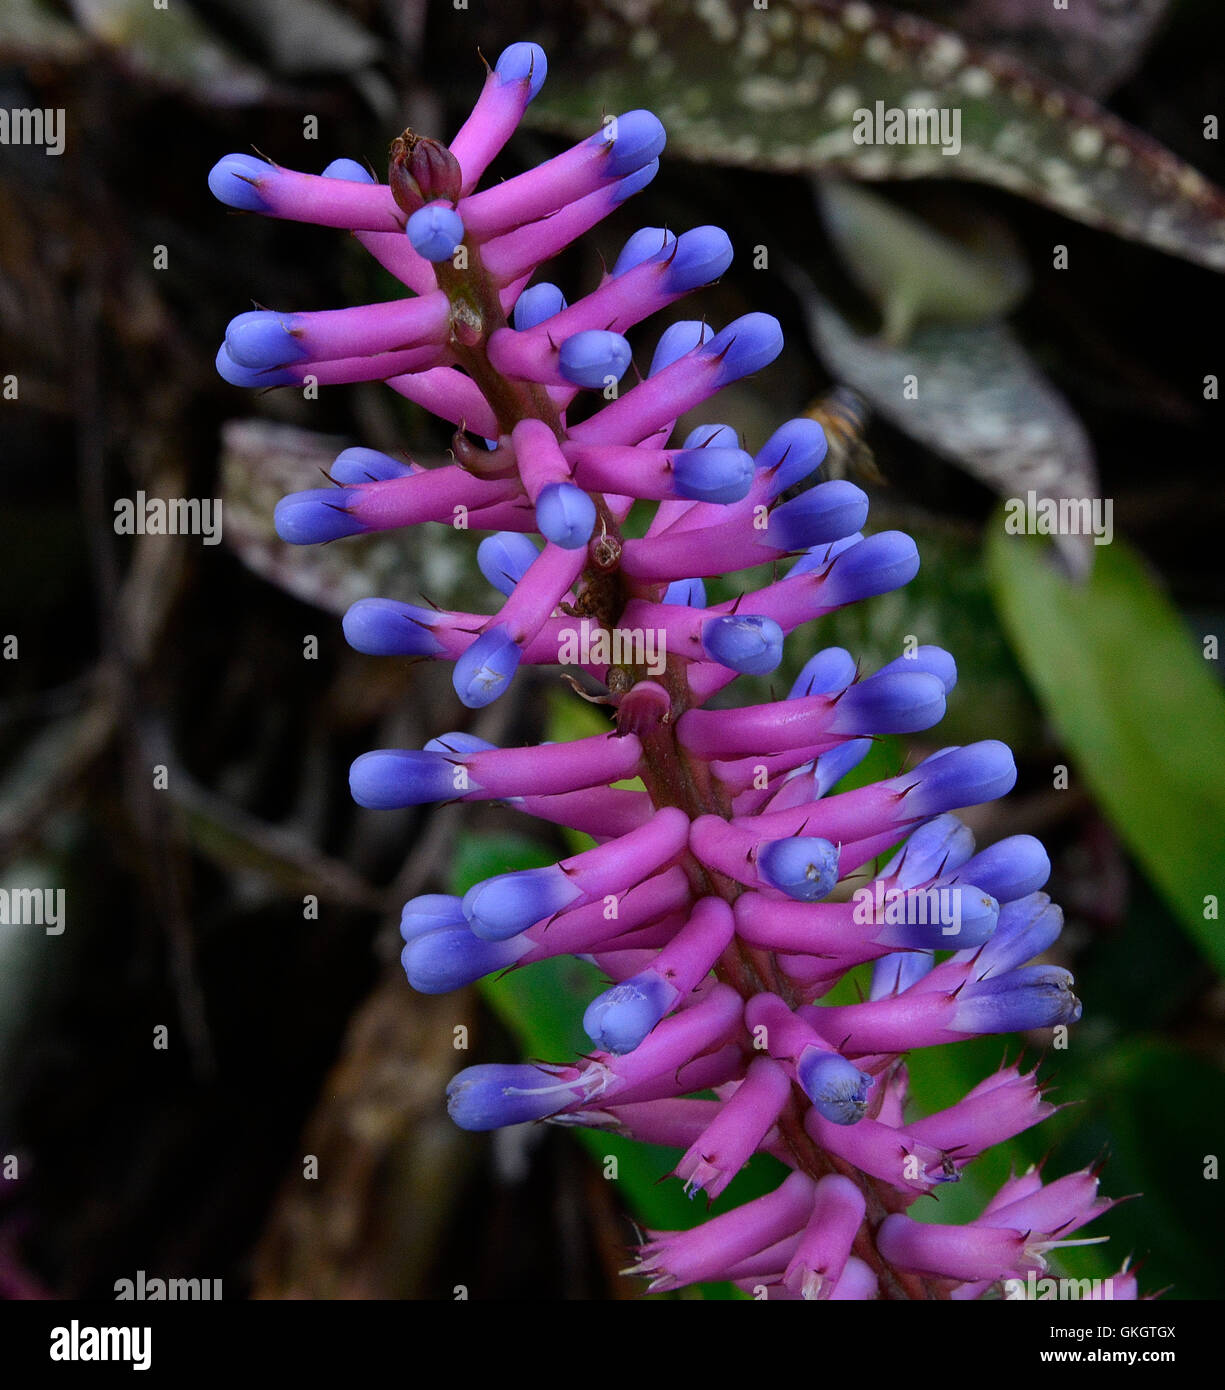 Match Stick Bromelia flower with purple and pink contrasts against a dark green background Stock Photo